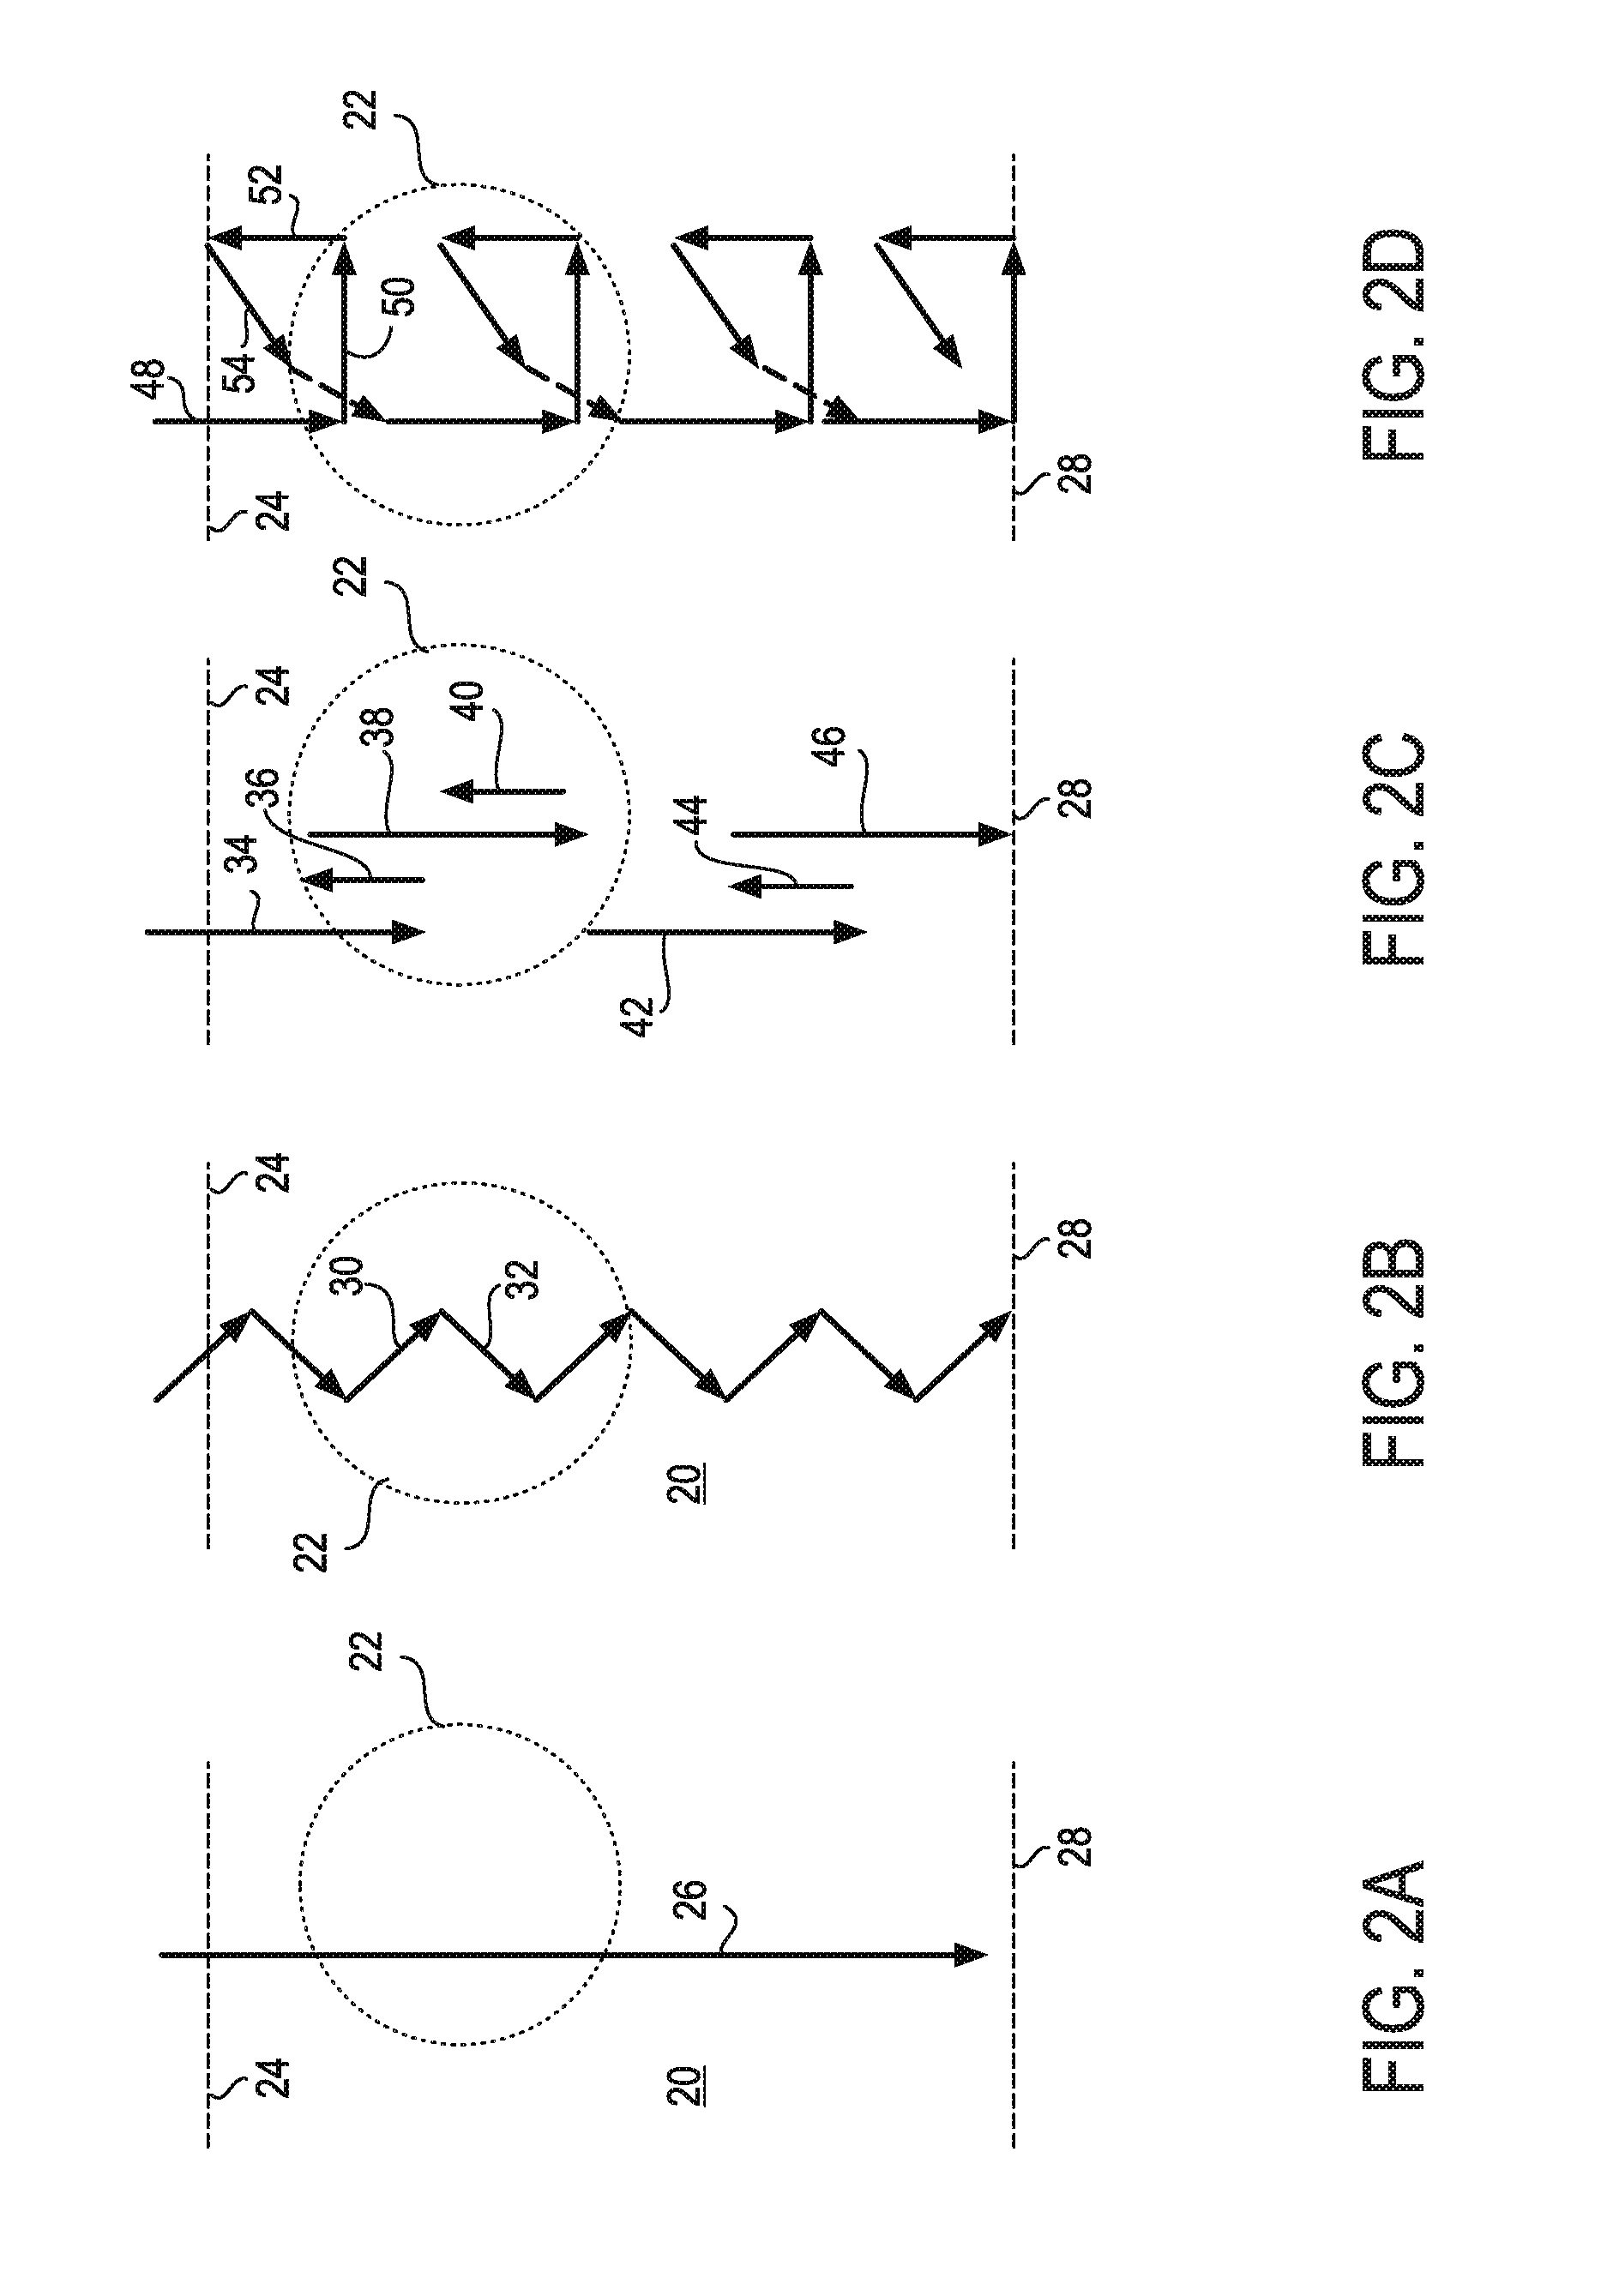 Automated system to create a cell smear